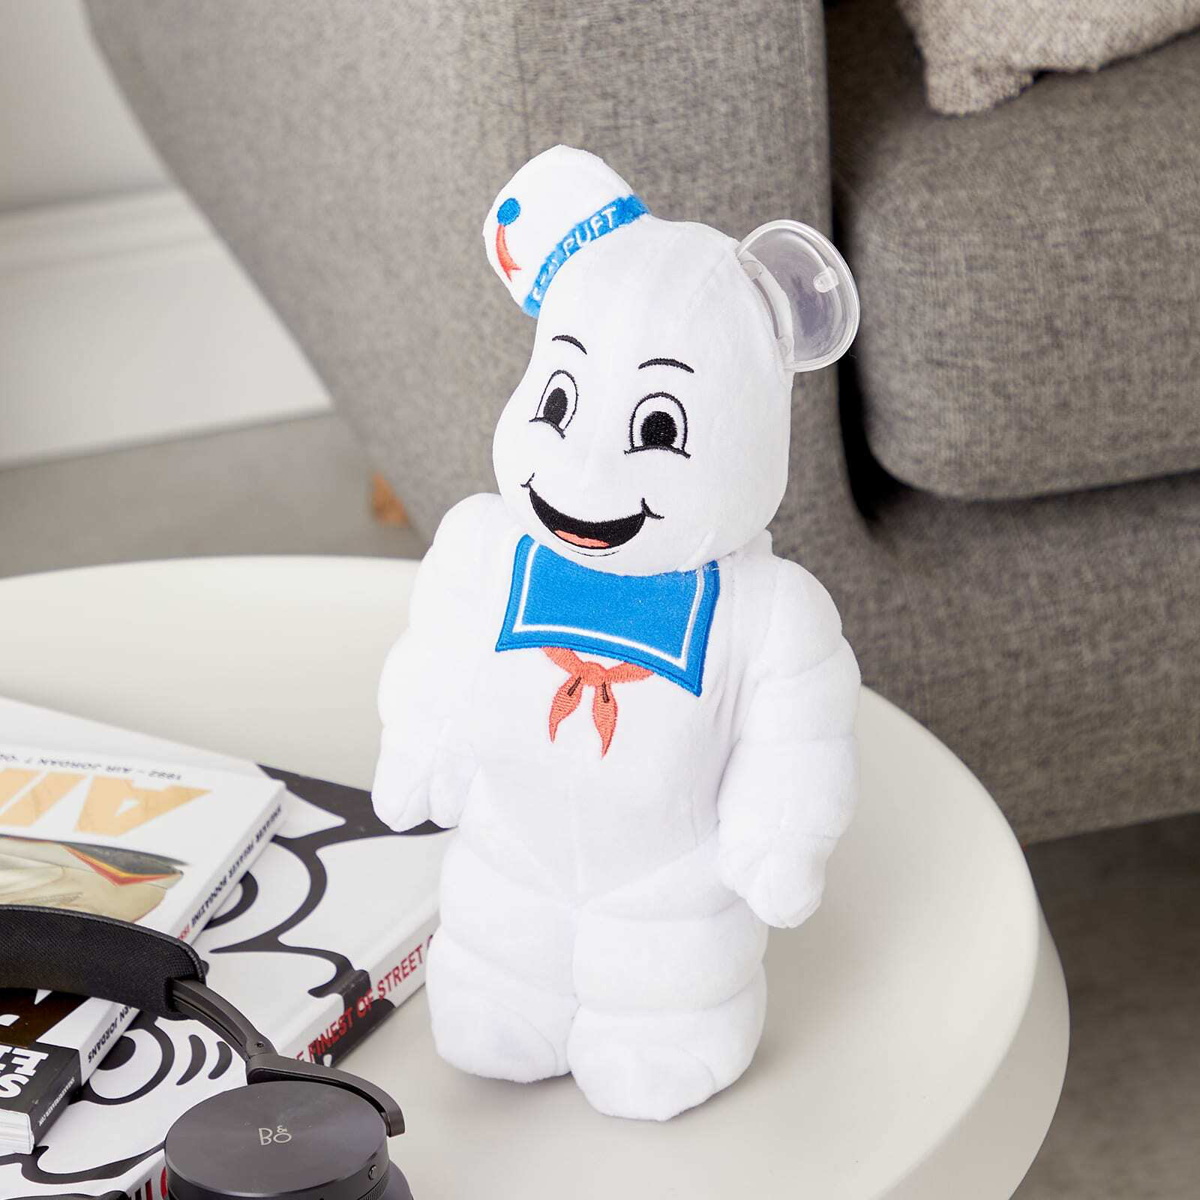 Medicom STAY PUFT MARSHMALLOW MAN COSTUME Be@rbrick in White 400 ...